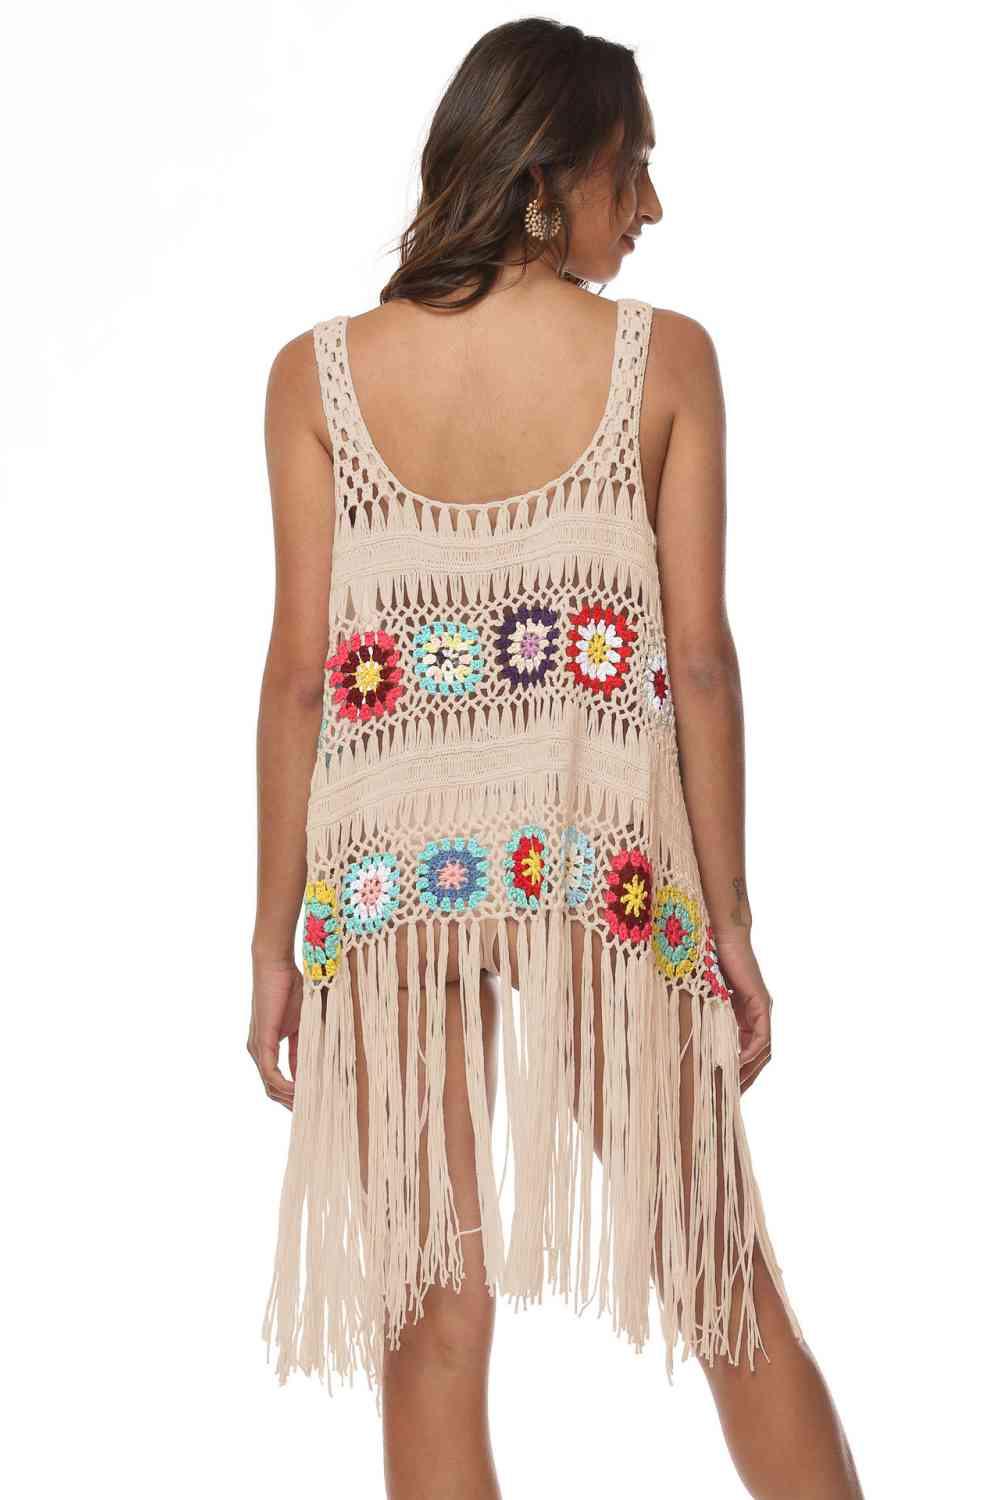 Openwork Fringe Detail Embroidery Sleeveless Cover-Up - Ash Boutique